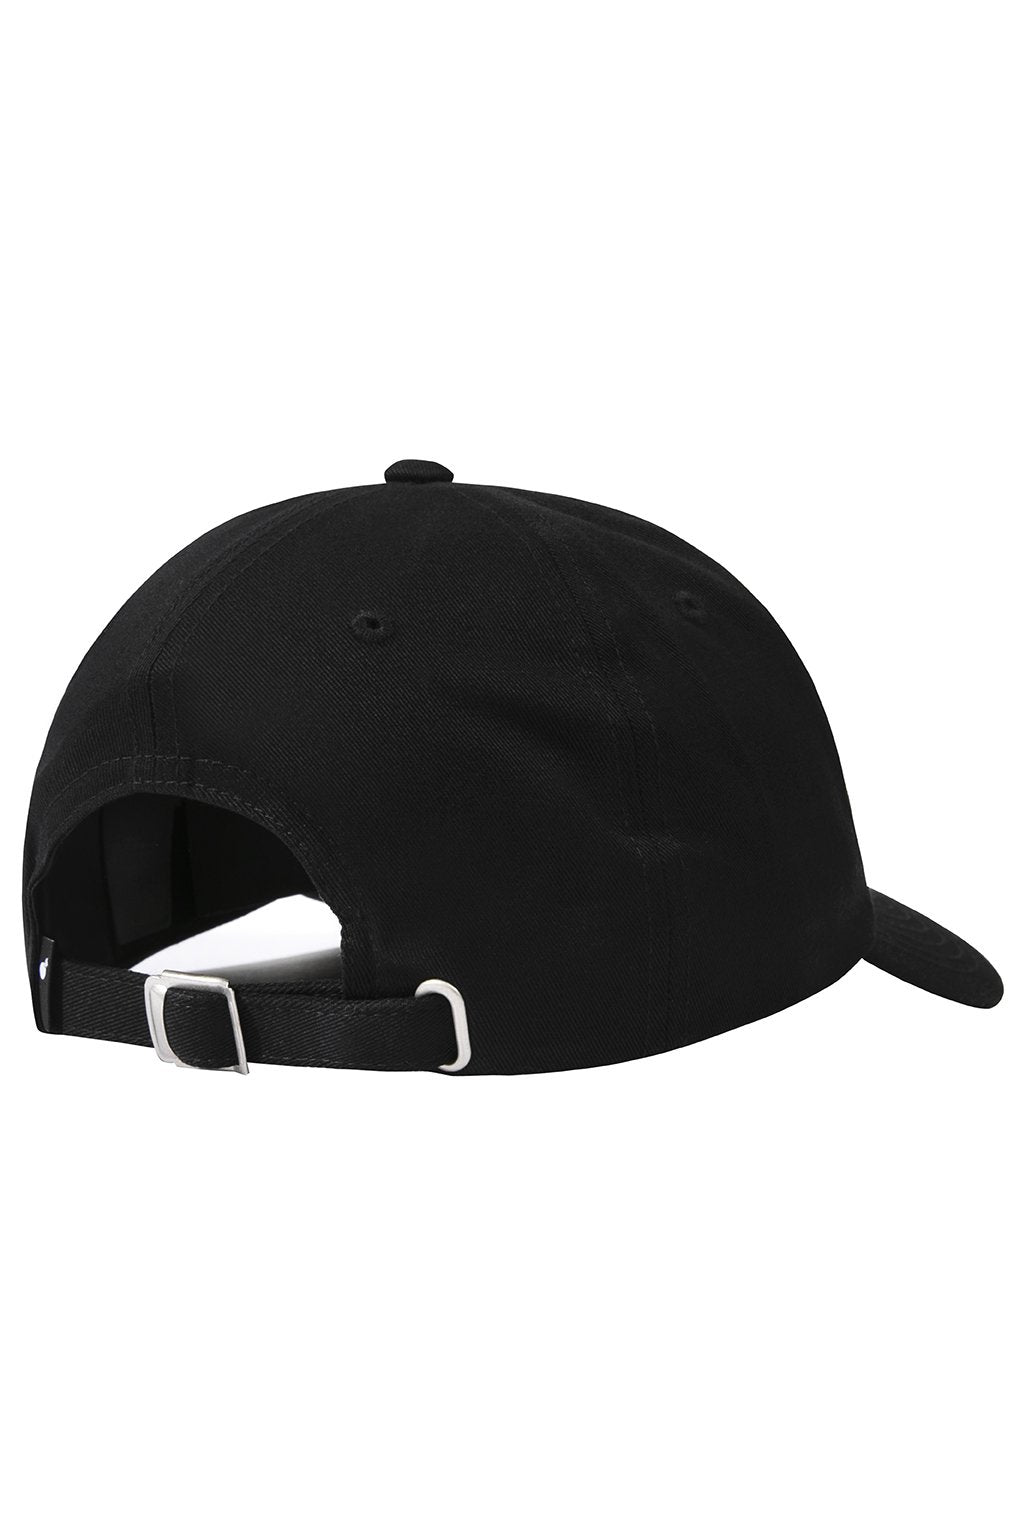 The Hundreds x Sanrio Hello Kitty Dad Hat in Black